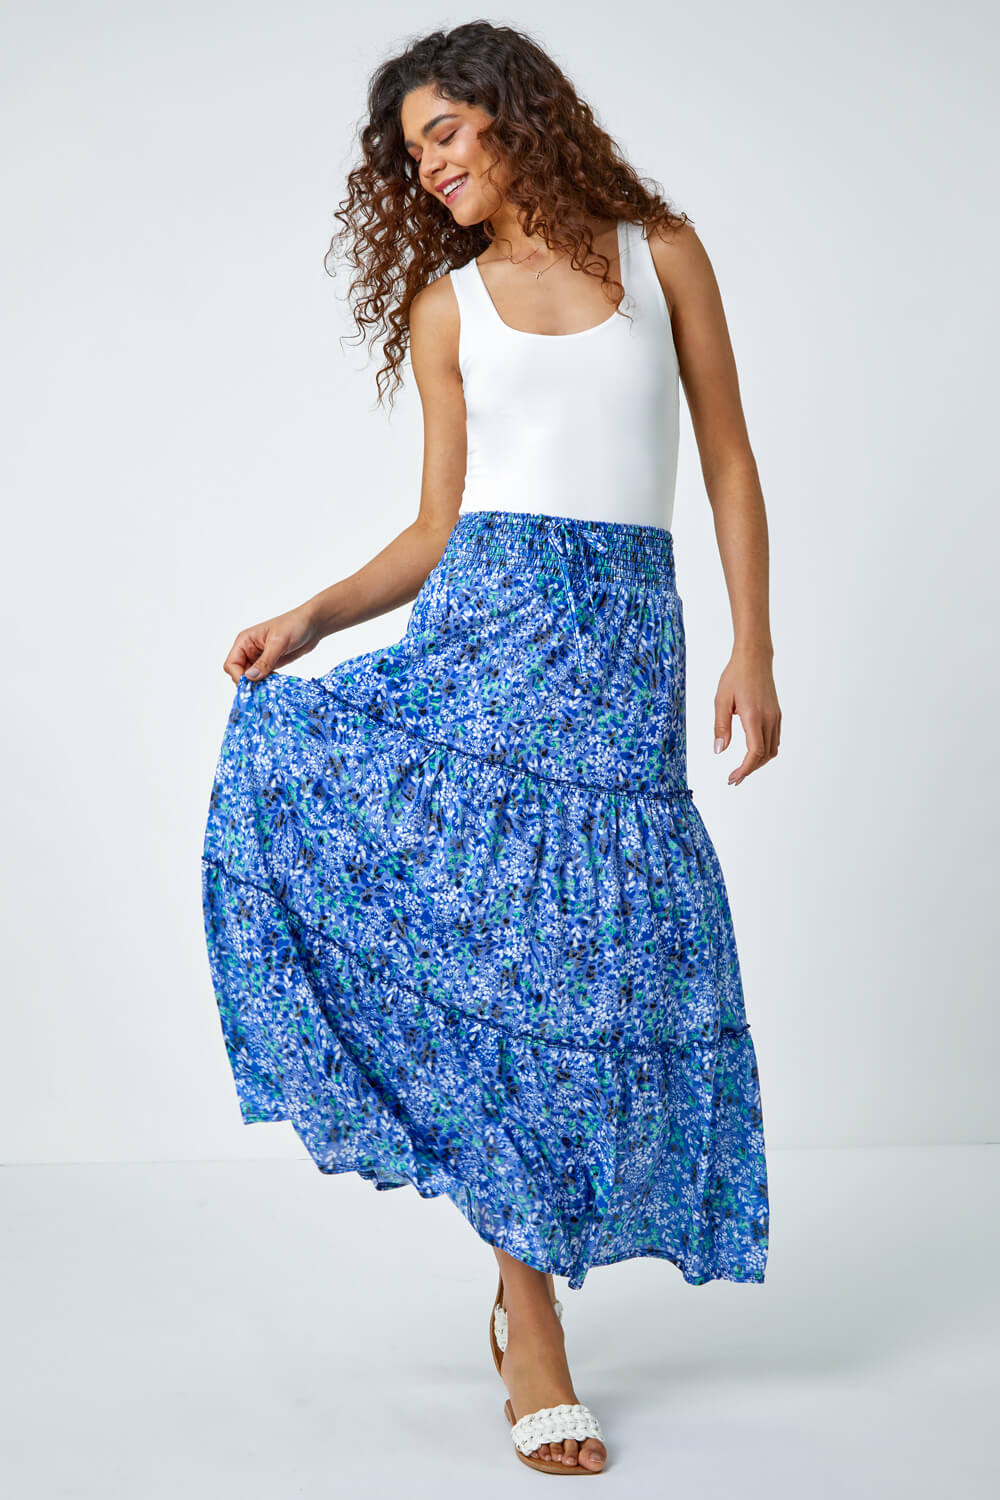 Blue Ditsy Floral Print Tiered Maxi Skirt, Image 2 of 5